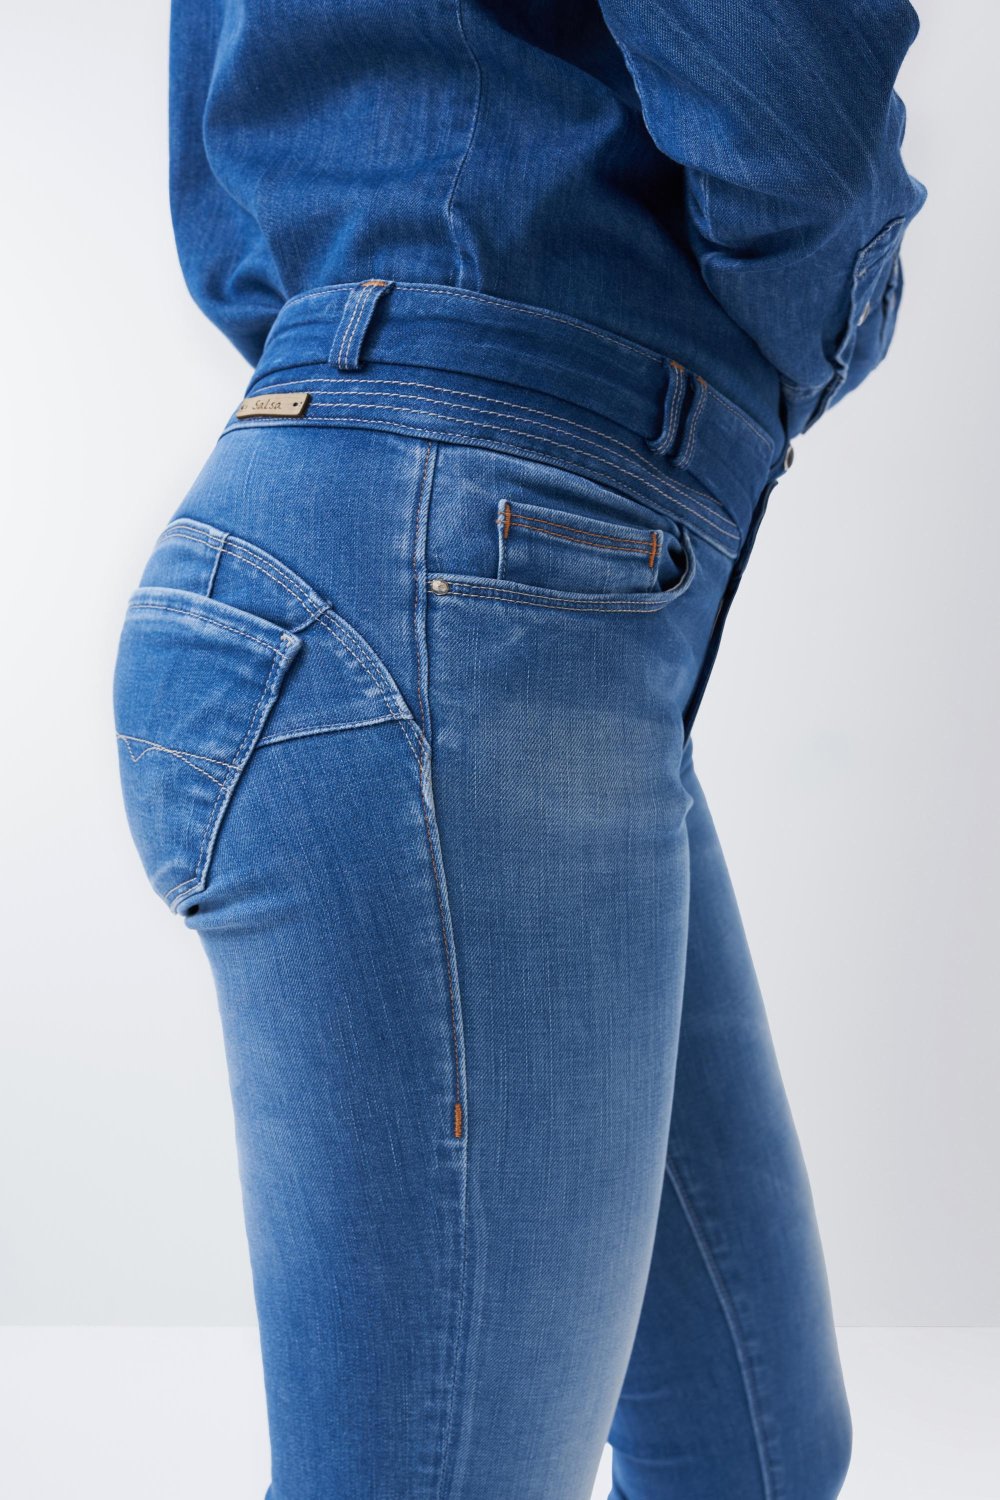 Skinny Push Up Wonder jeans with topstitch detail on the waistband - Salsa